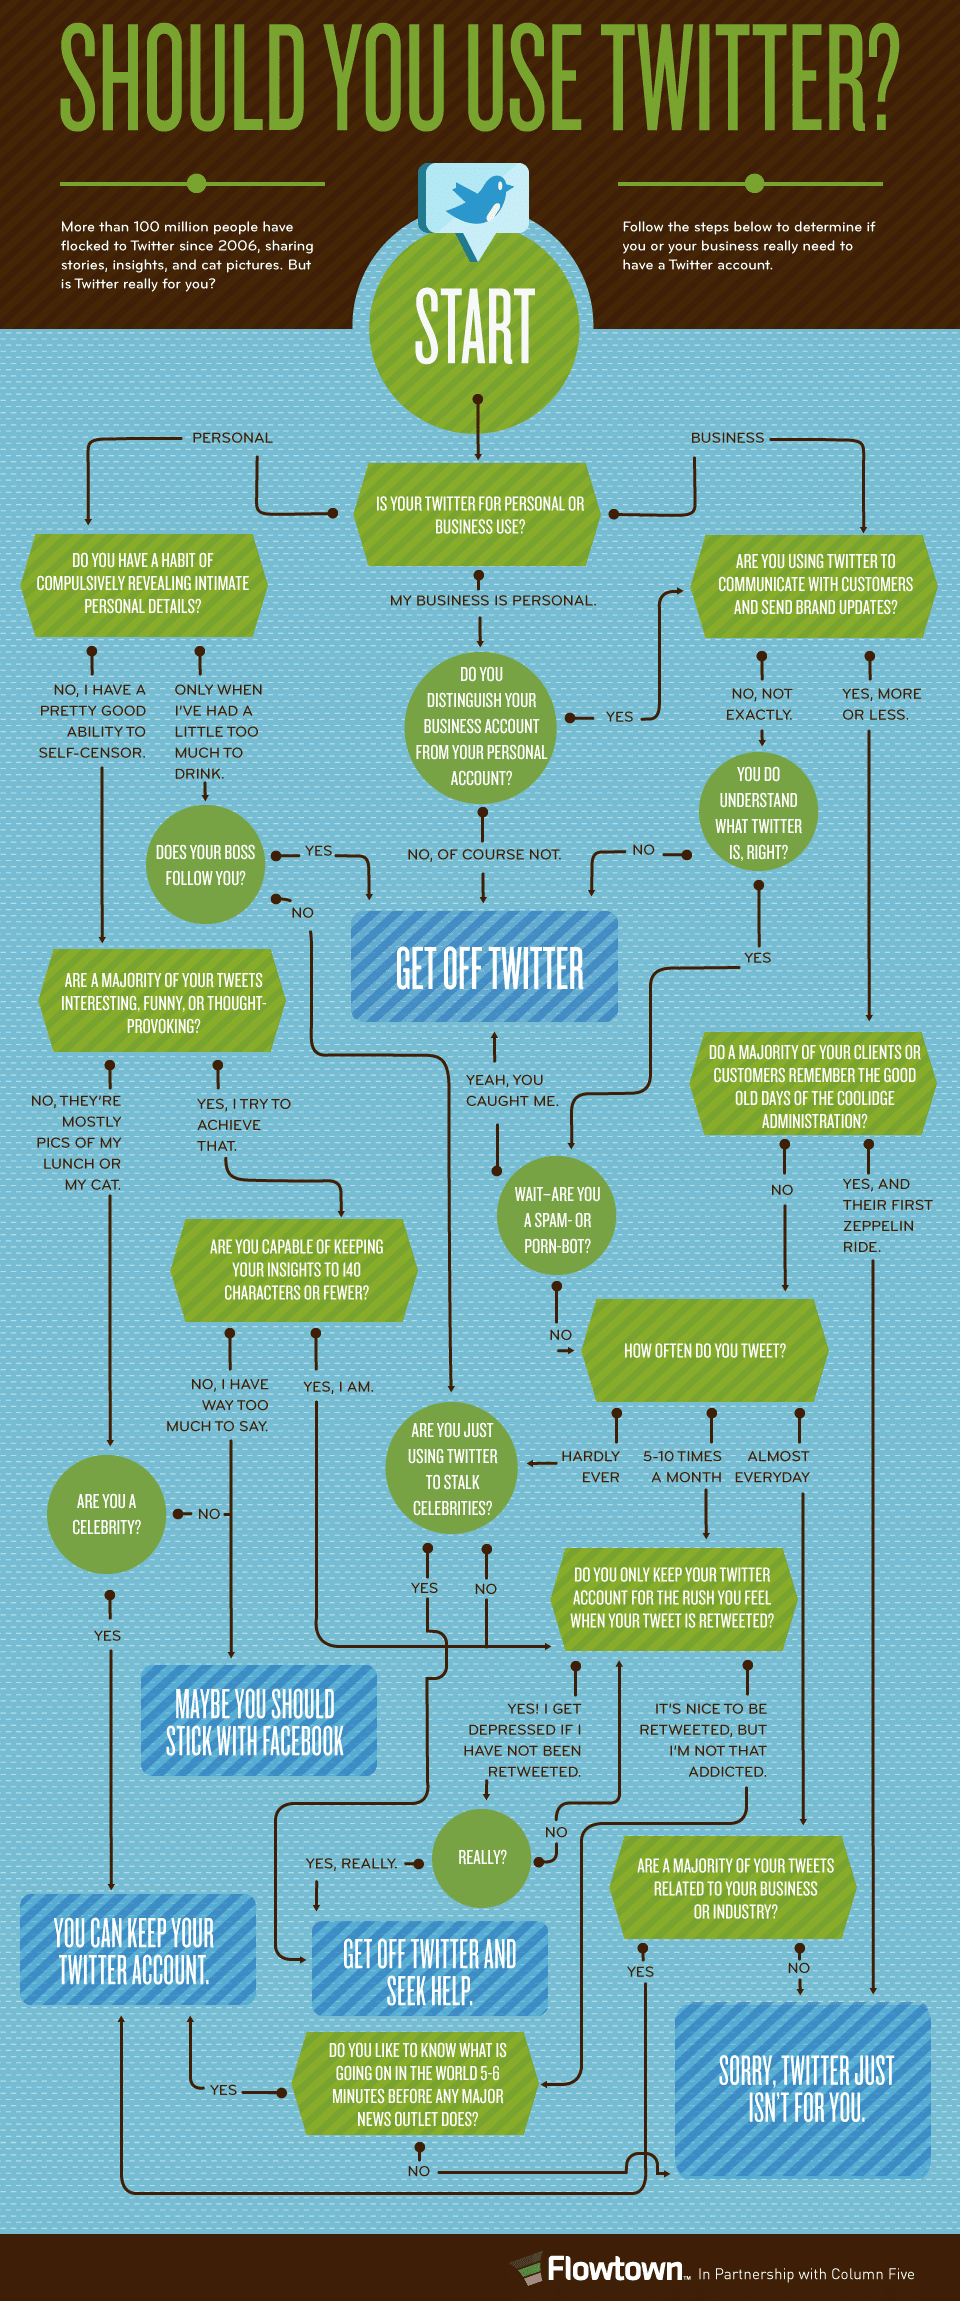 Should You Use Twitter? [Flowchart]